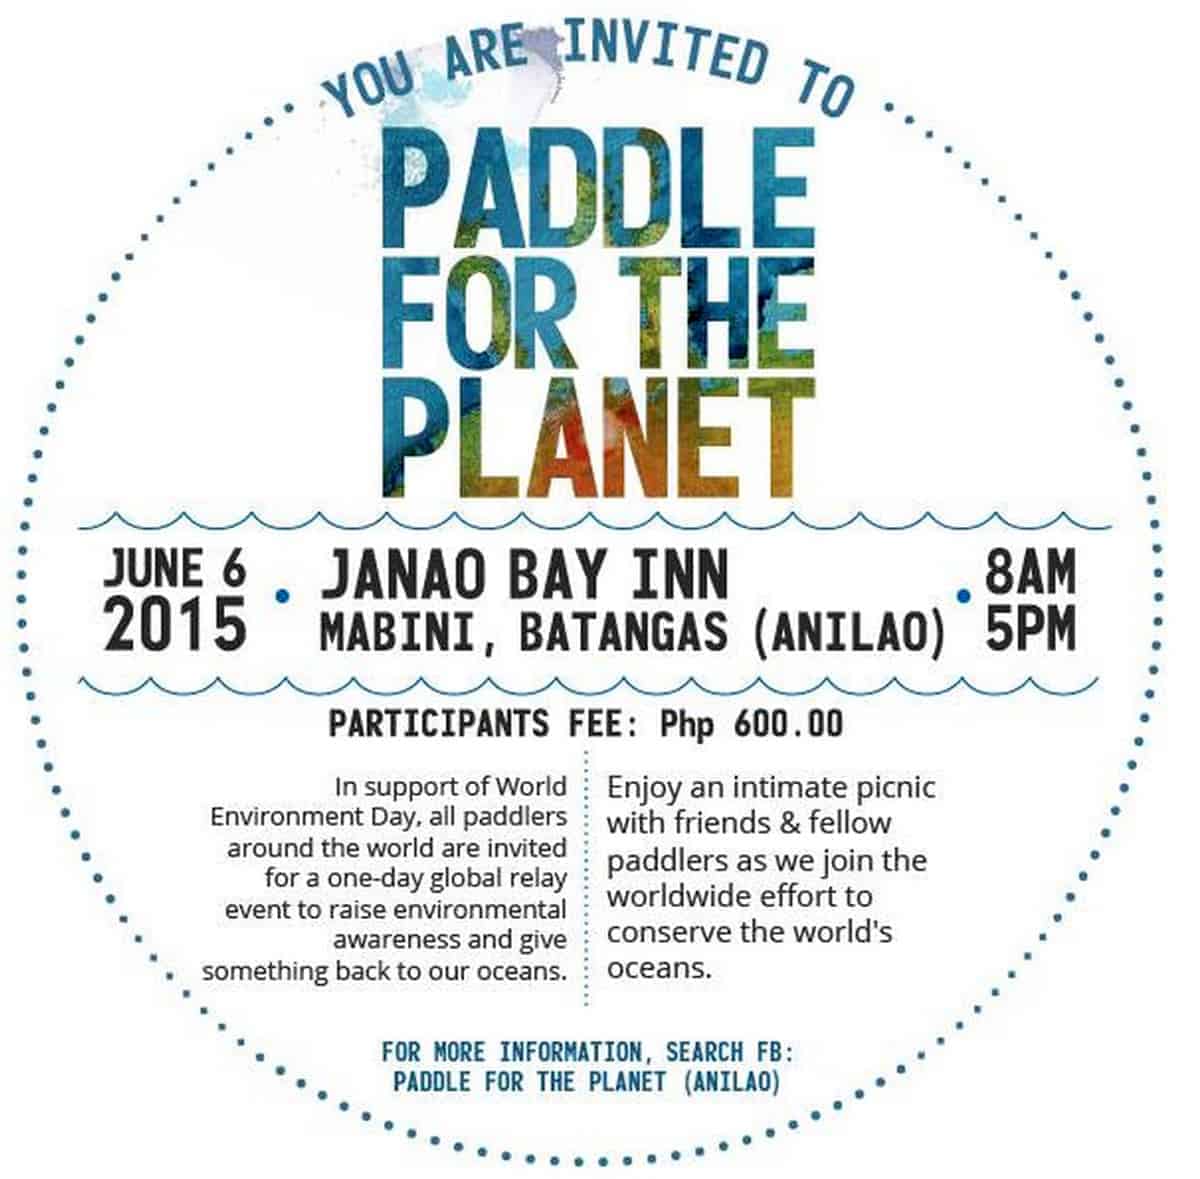 Global event for paddlers.